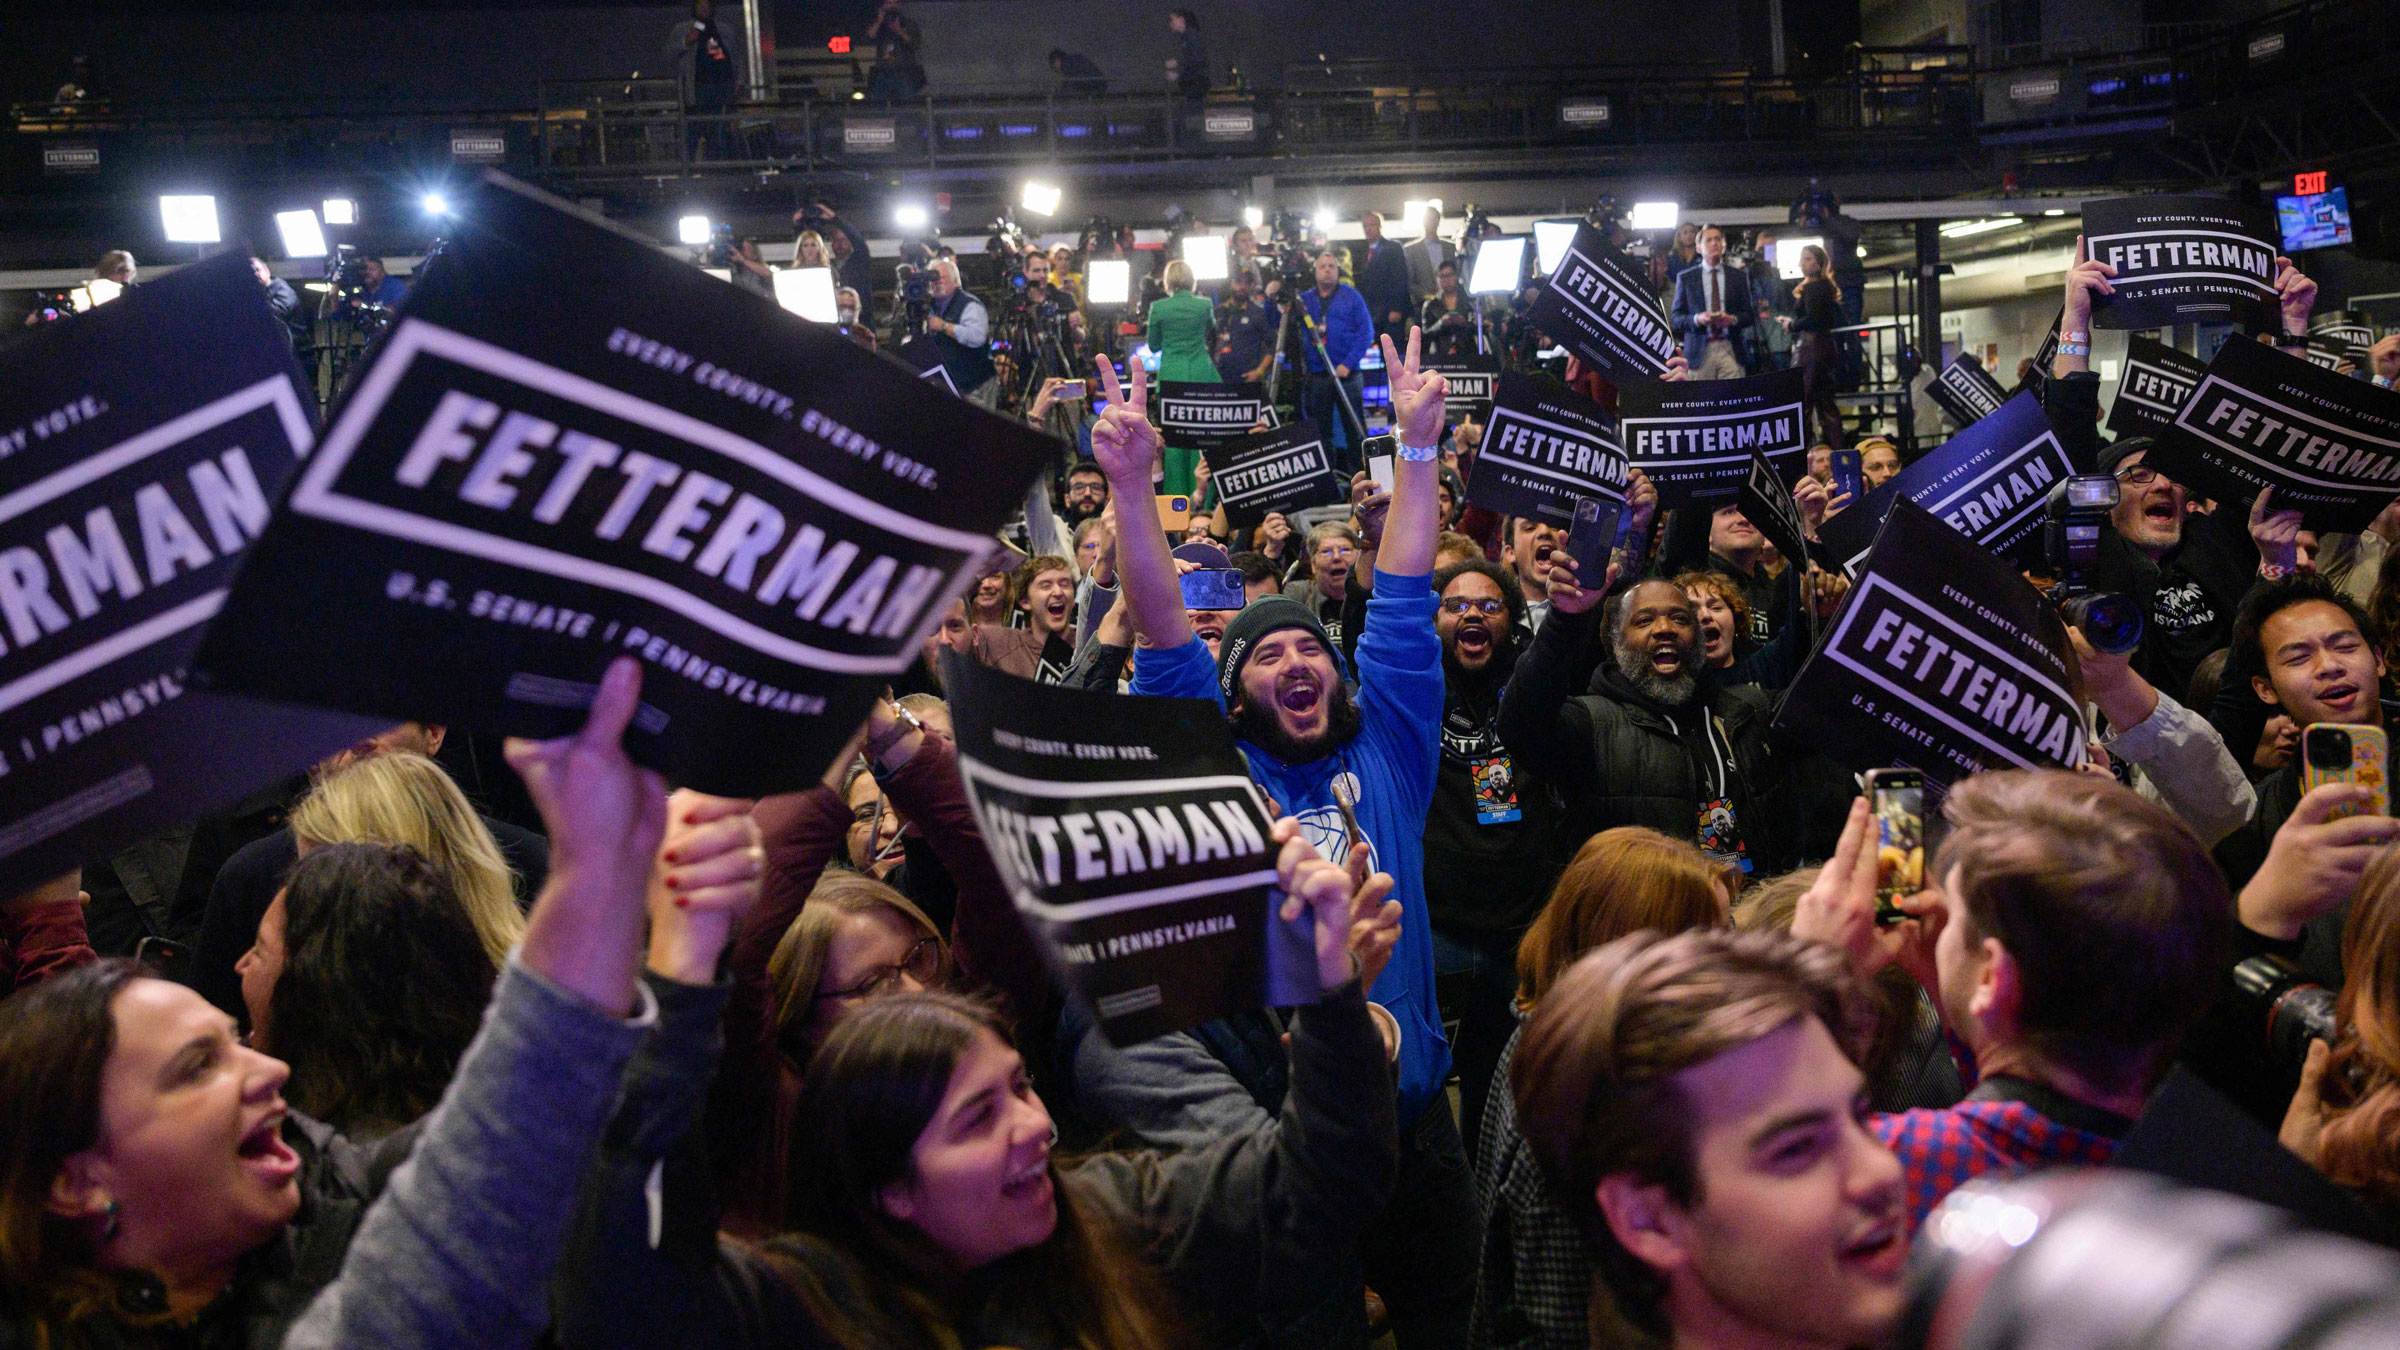 Fetterman supporters celebrate in Pittsburgh.